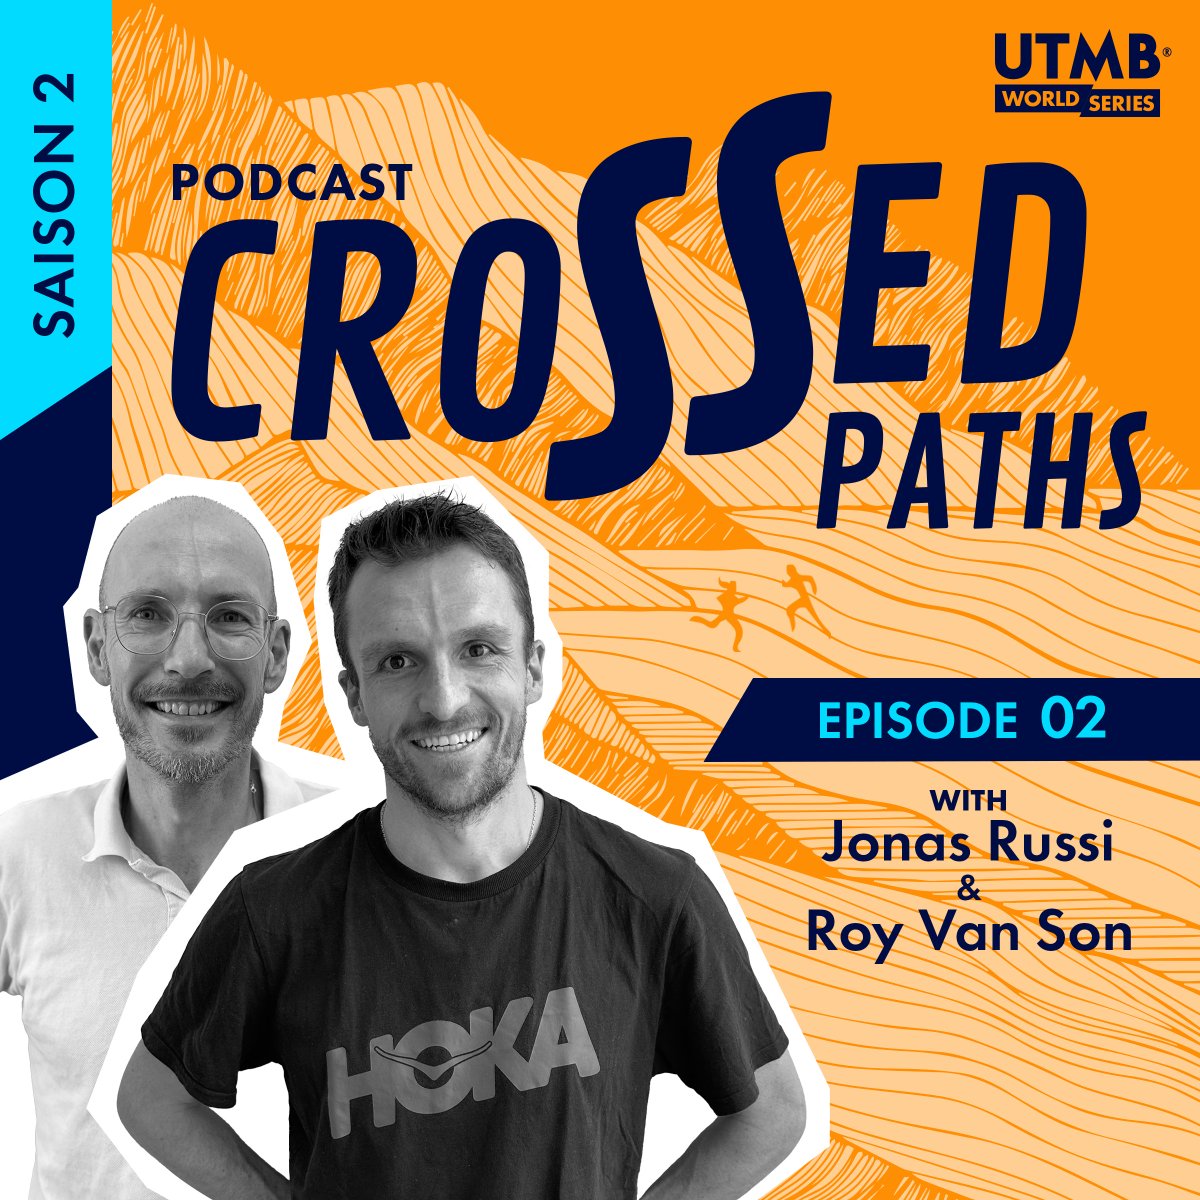 Guess who Jonas Russi trains with the most. The answer in our new episode of #CrossedPaths podcast, Jonas, Elite Swiss 🇨🇭 runner, winner of the @LavaredoUT 2023, chats with Roy van Son, a passionate Dutch runner based in Zurich. Listen now 👉 utmb.world/media/podcasts #UTMBWorld